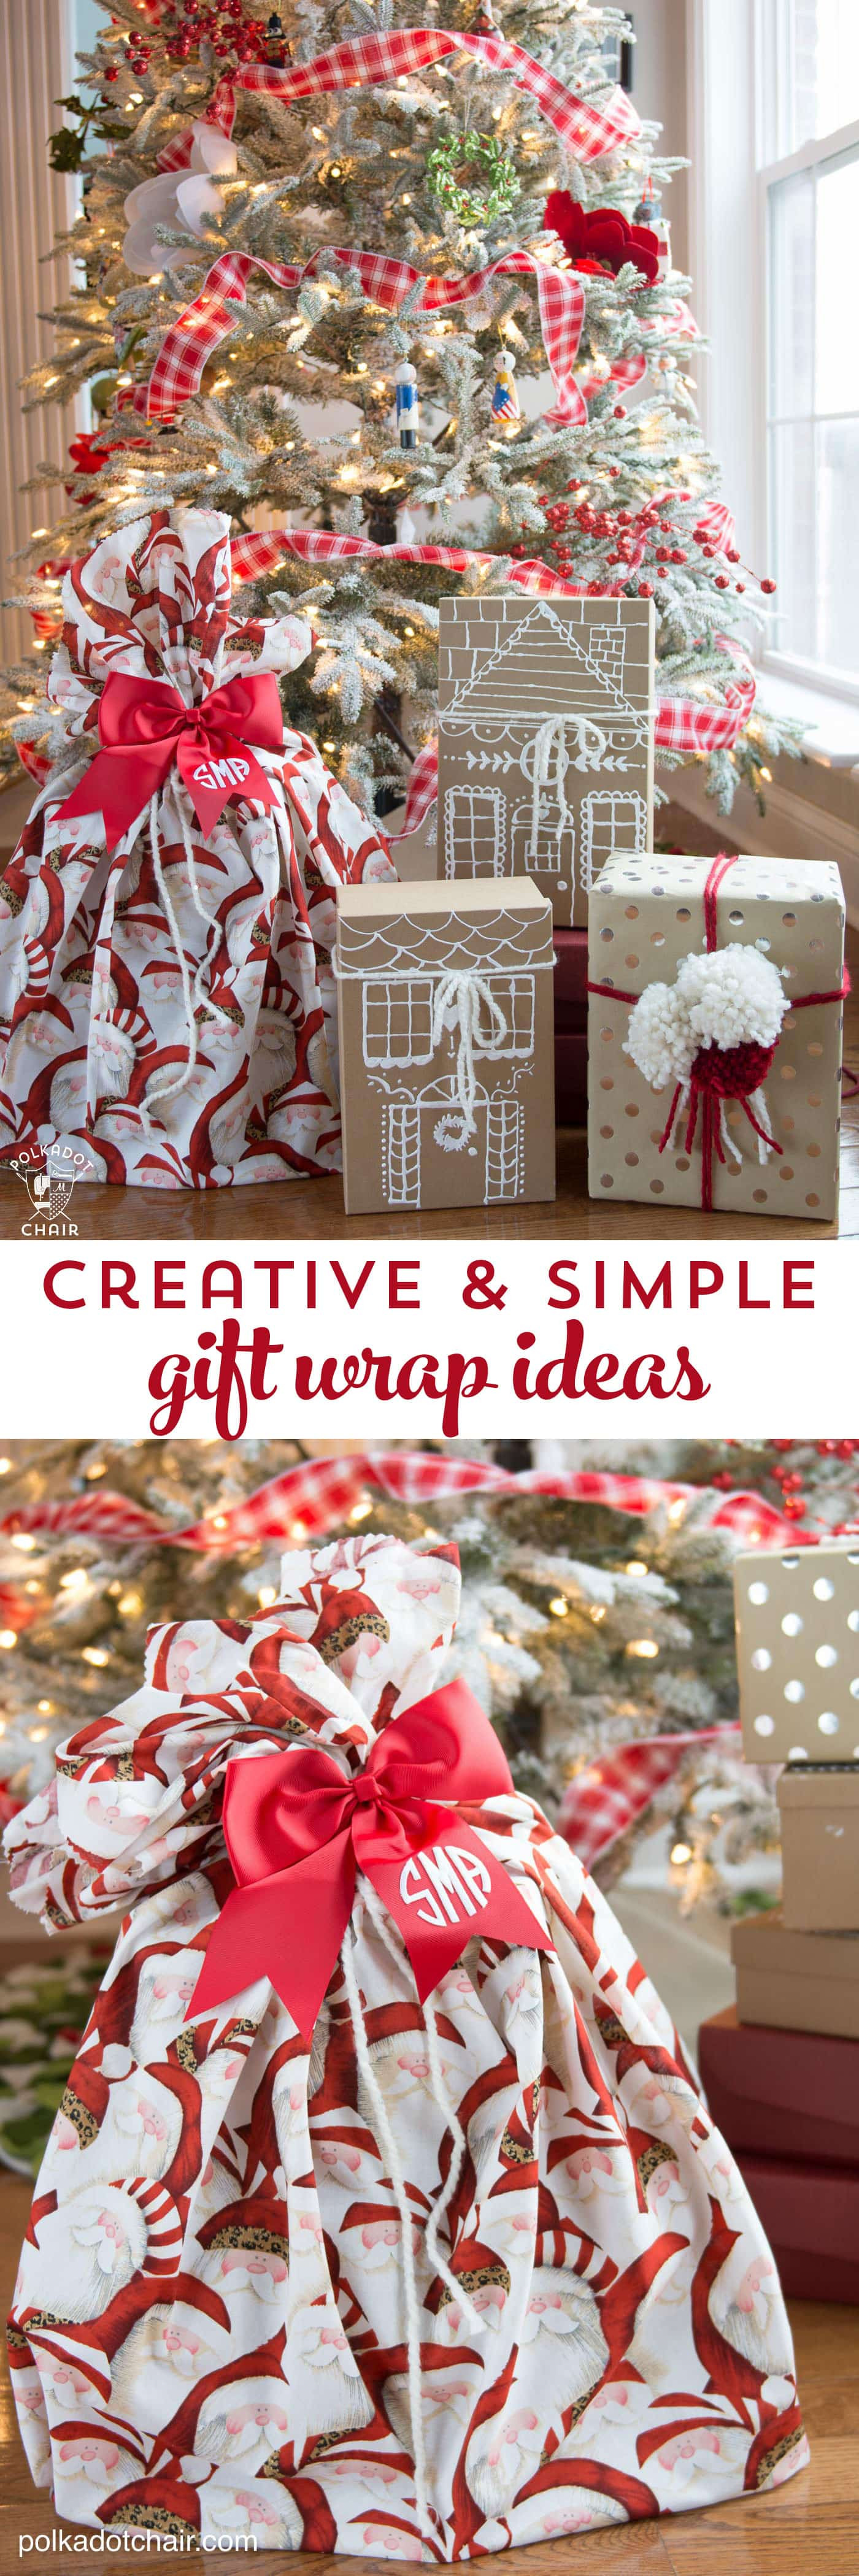 Unique Christmas Gift Ideas
 3 Simple and Creative Gift Wrap Ideas The Polka Dot Chair